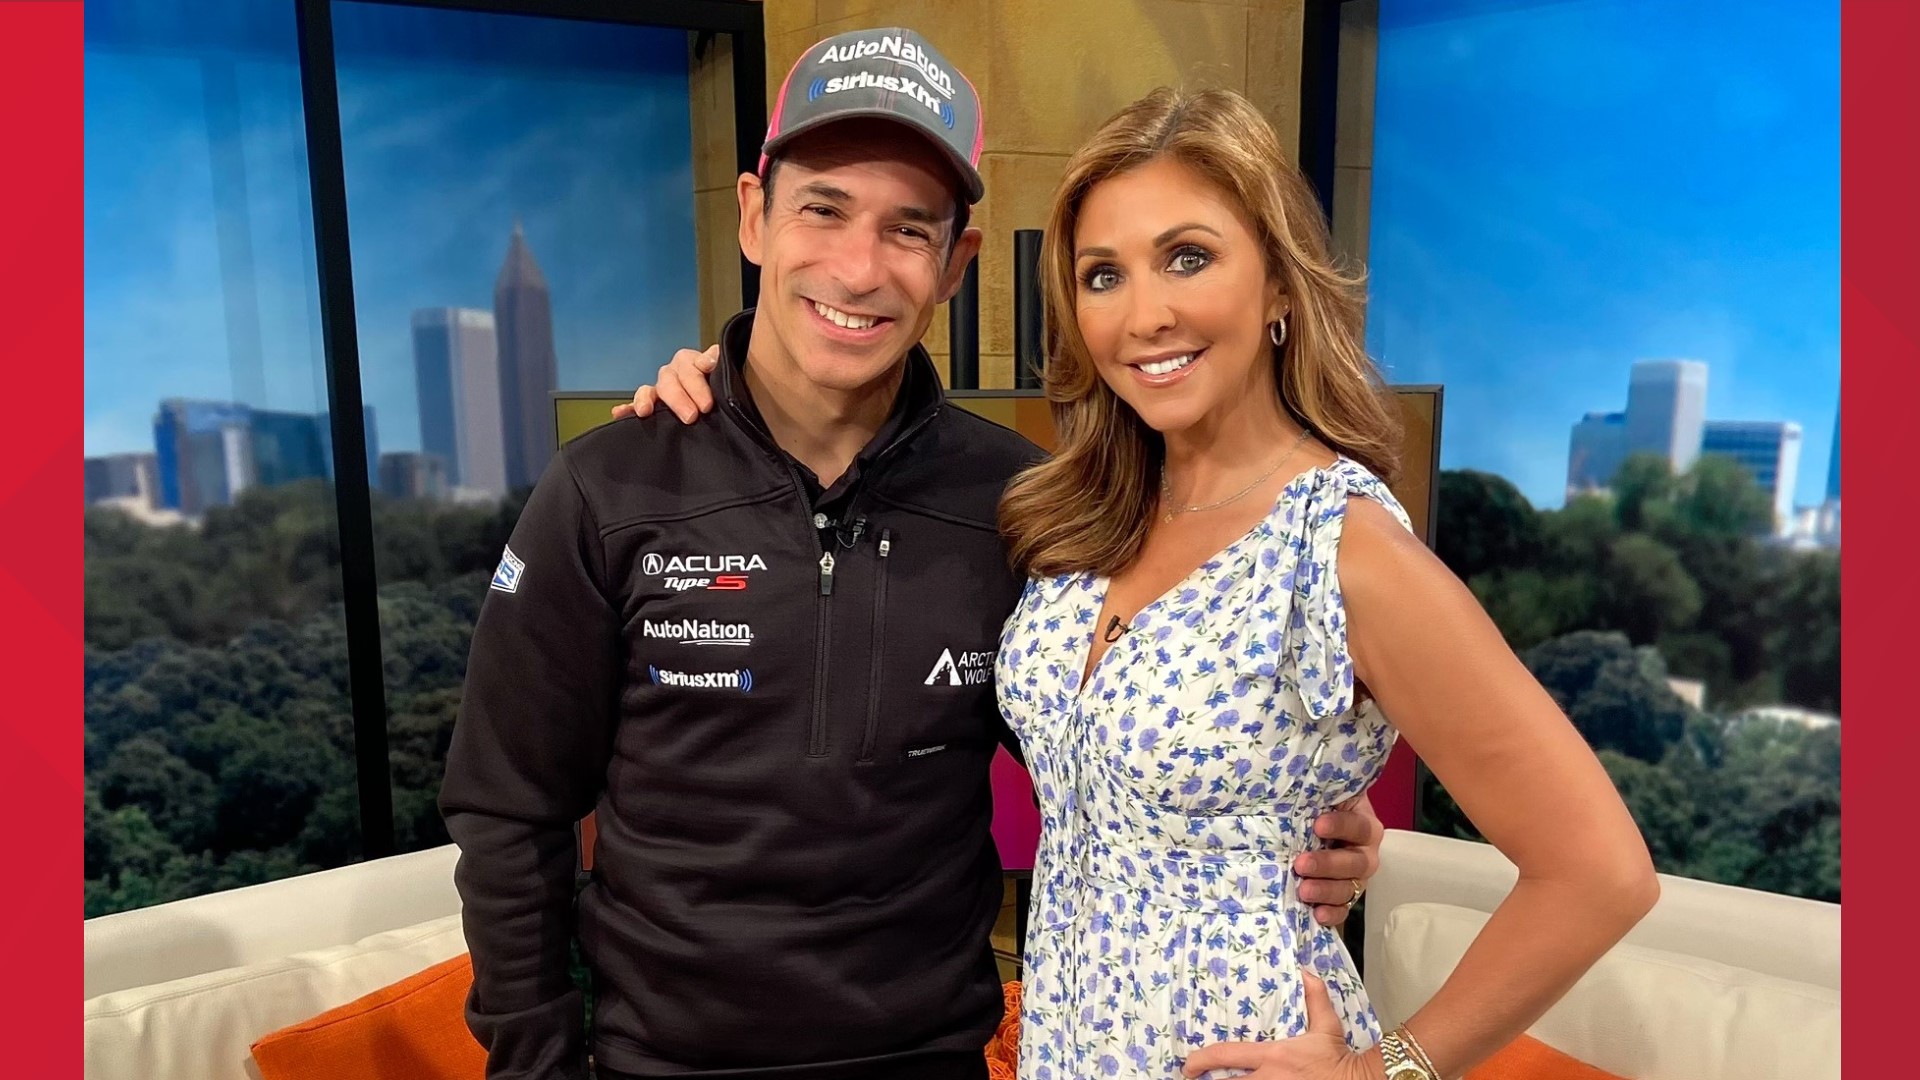 He's racing royalty! IndyCar champ Hélio Castroneves previews his latest endurance race right here in Atlanta.